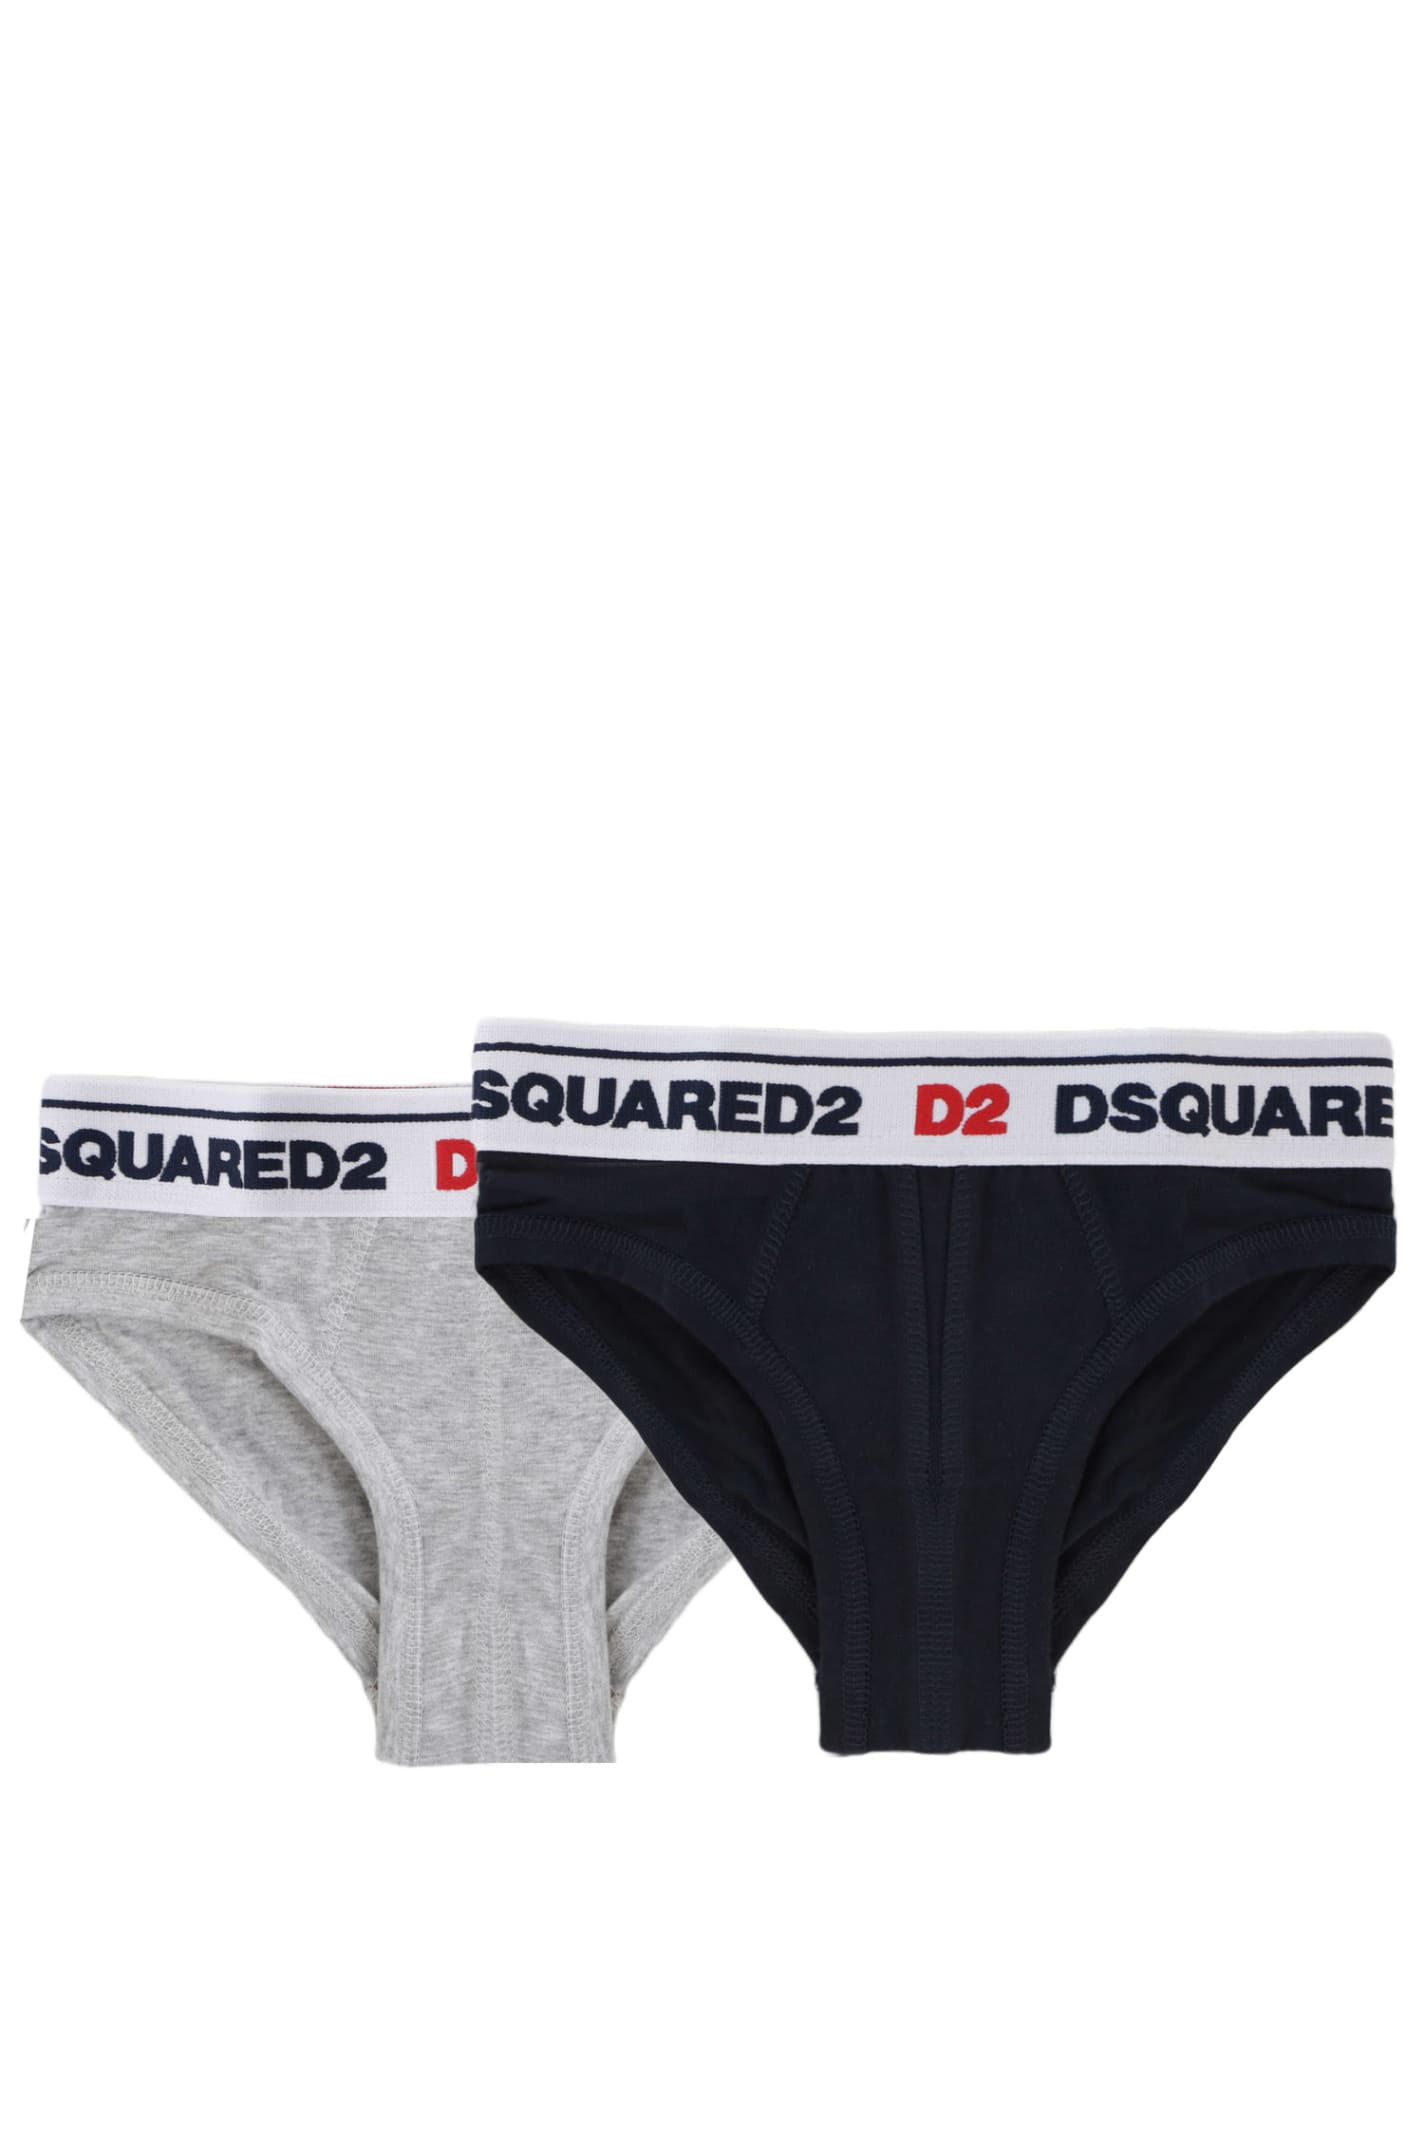 Dsquared2 Kids' Pack Of 2 Stretch Jersey Slip In Multicolor